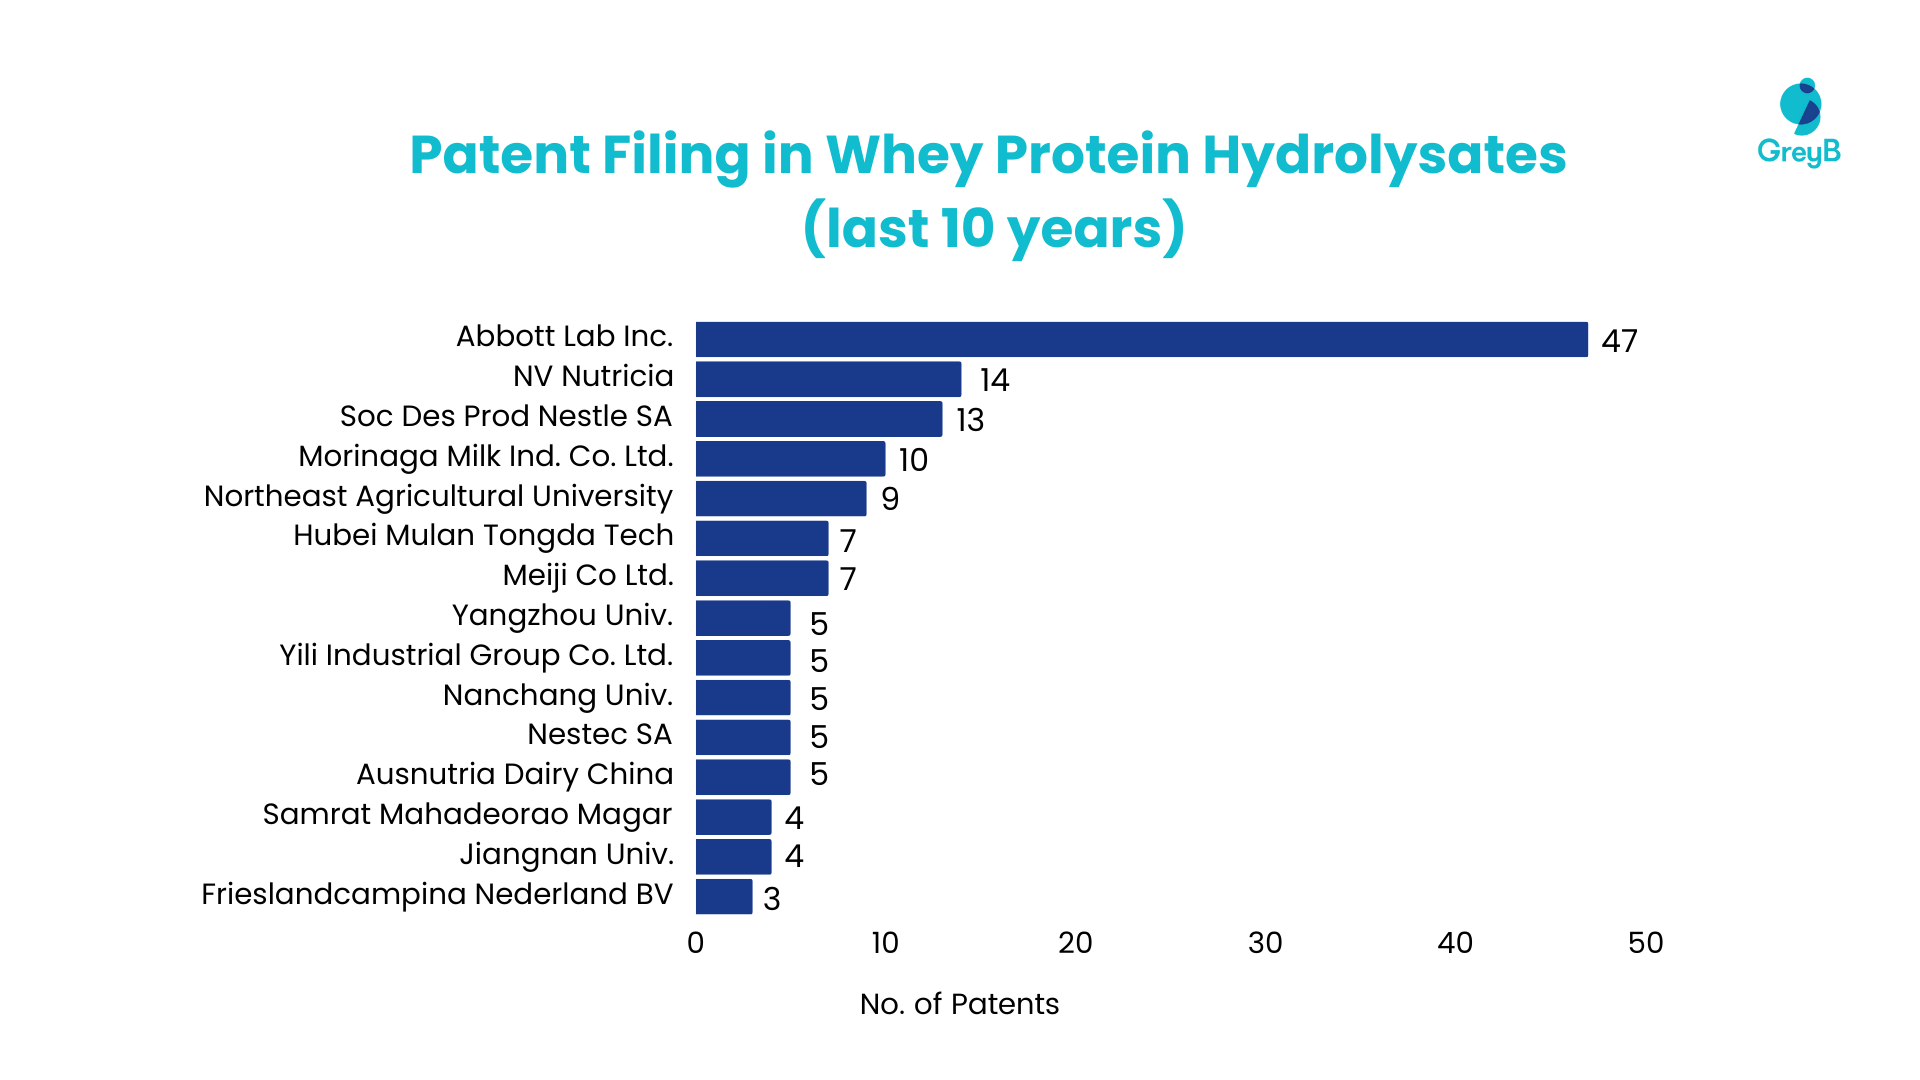 Dairy Industry Innovation Trends: Patent Filing in Whey Protein Hydrolysates 
(last 10 years)